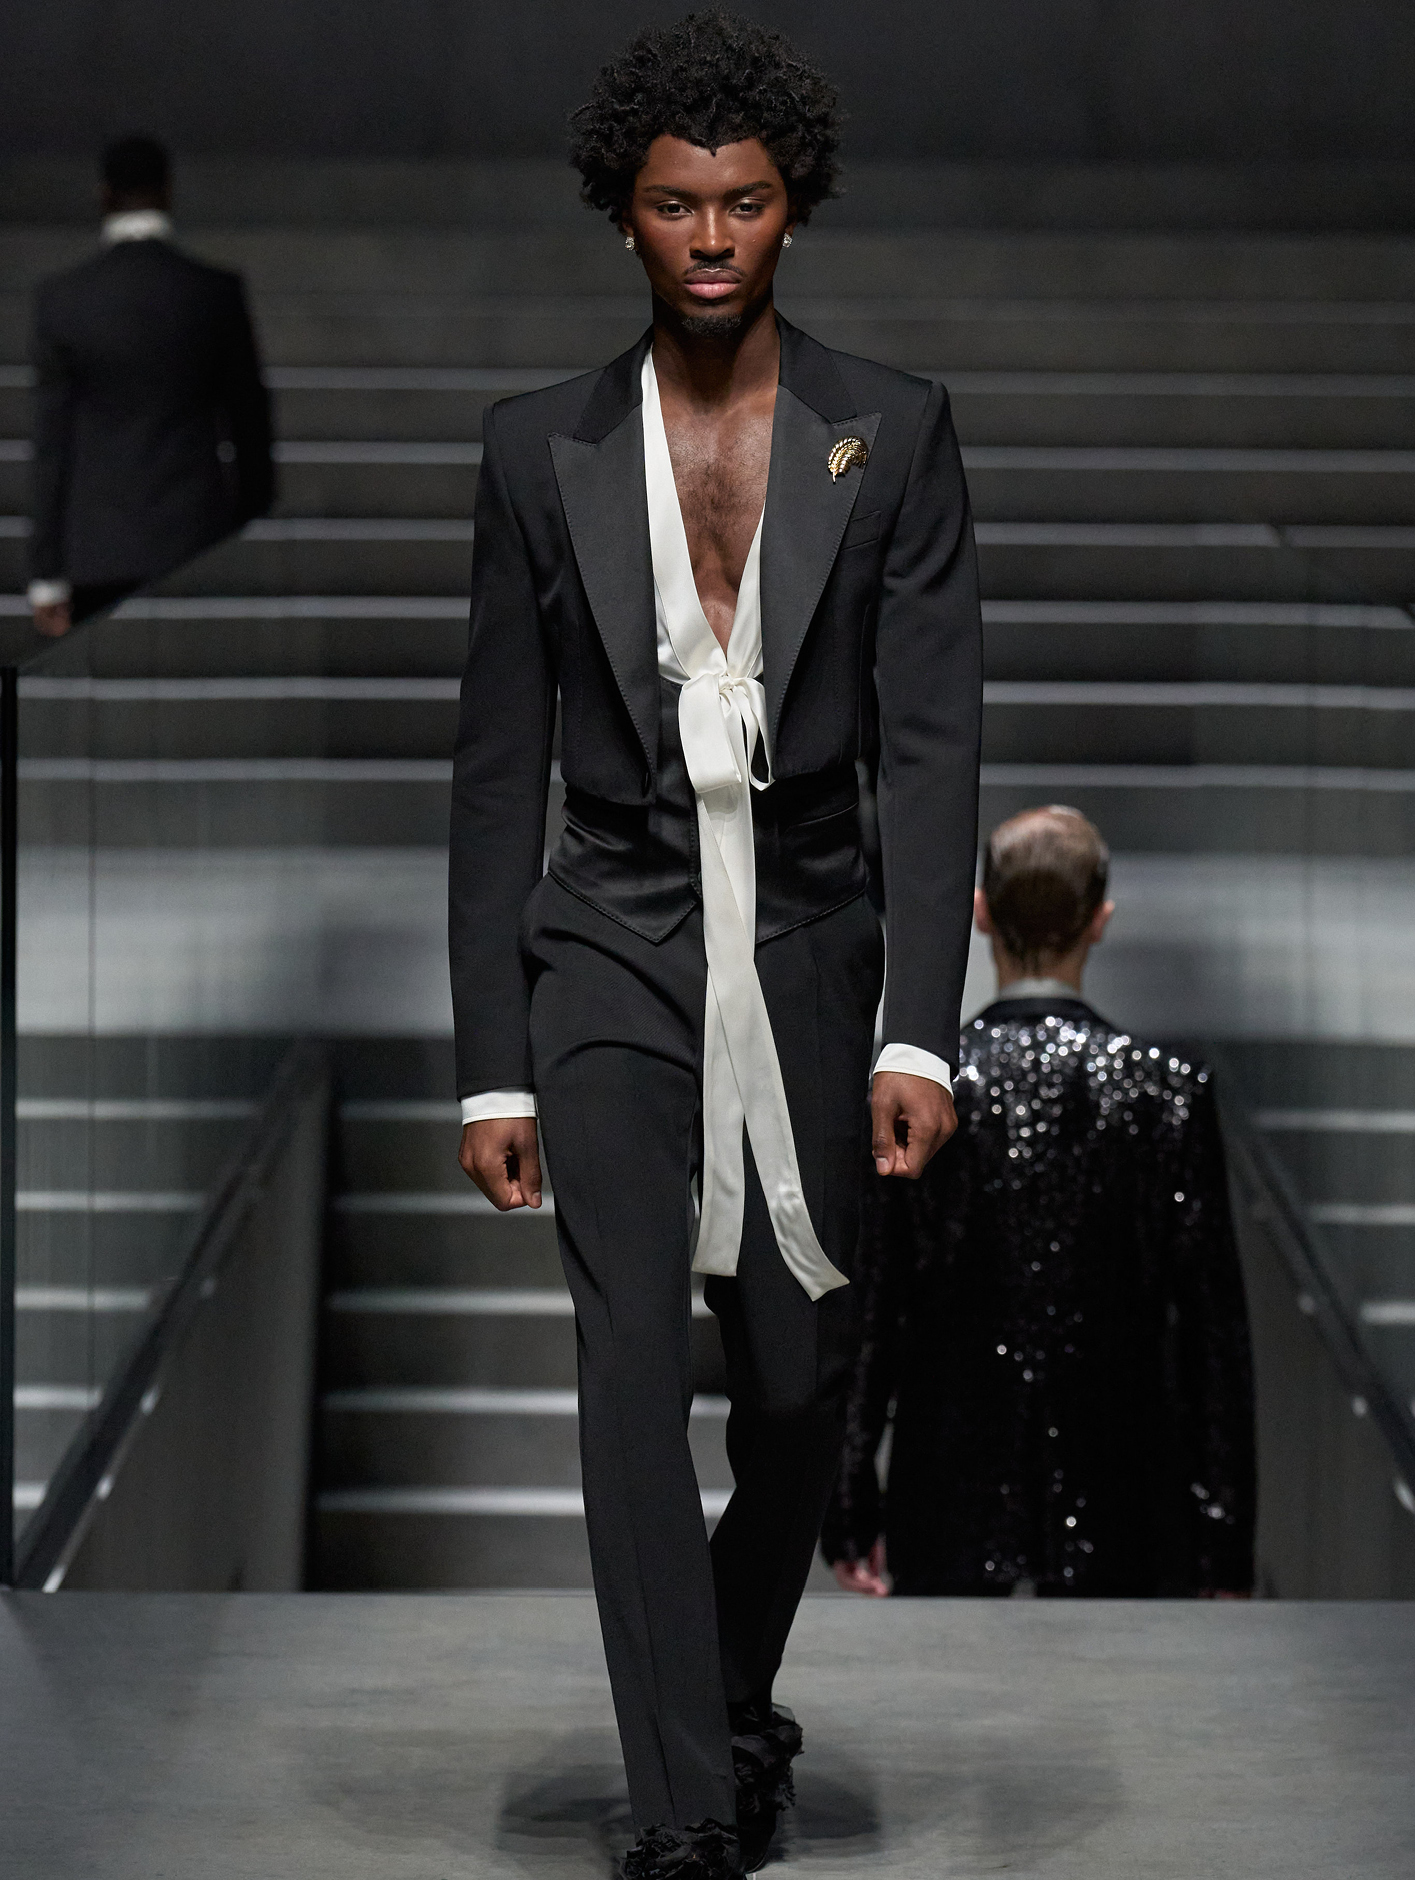 Accessories including fluttering bows added a dramatic touch to structured tuxedos